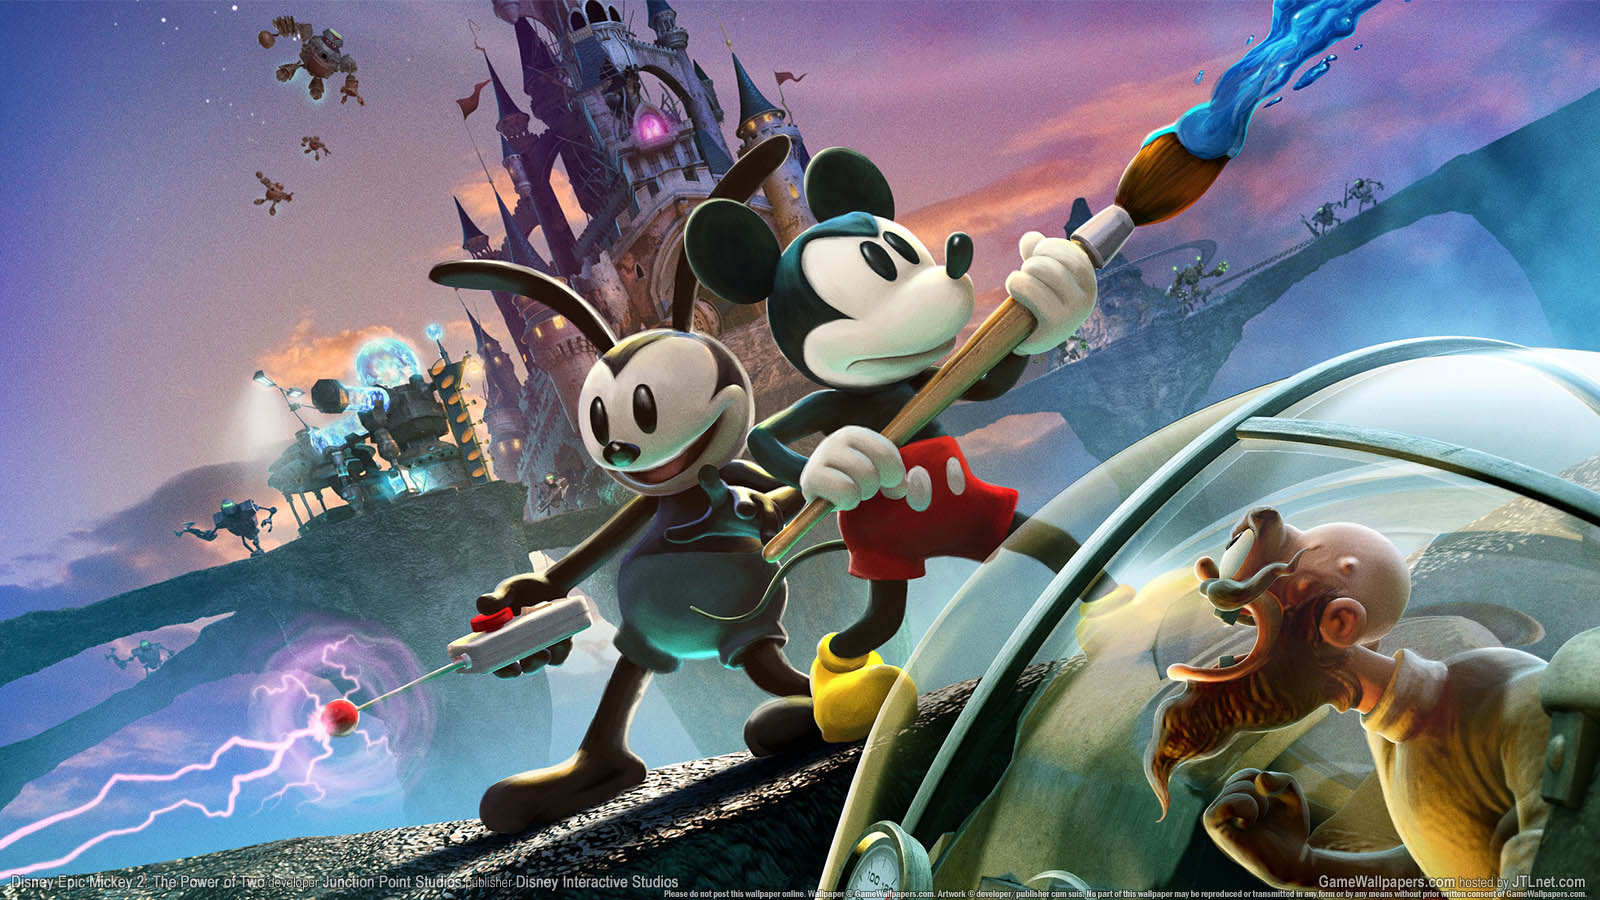 Disney Epic Mickey 2%3A The Power of Two achtergrond 01 1600x900